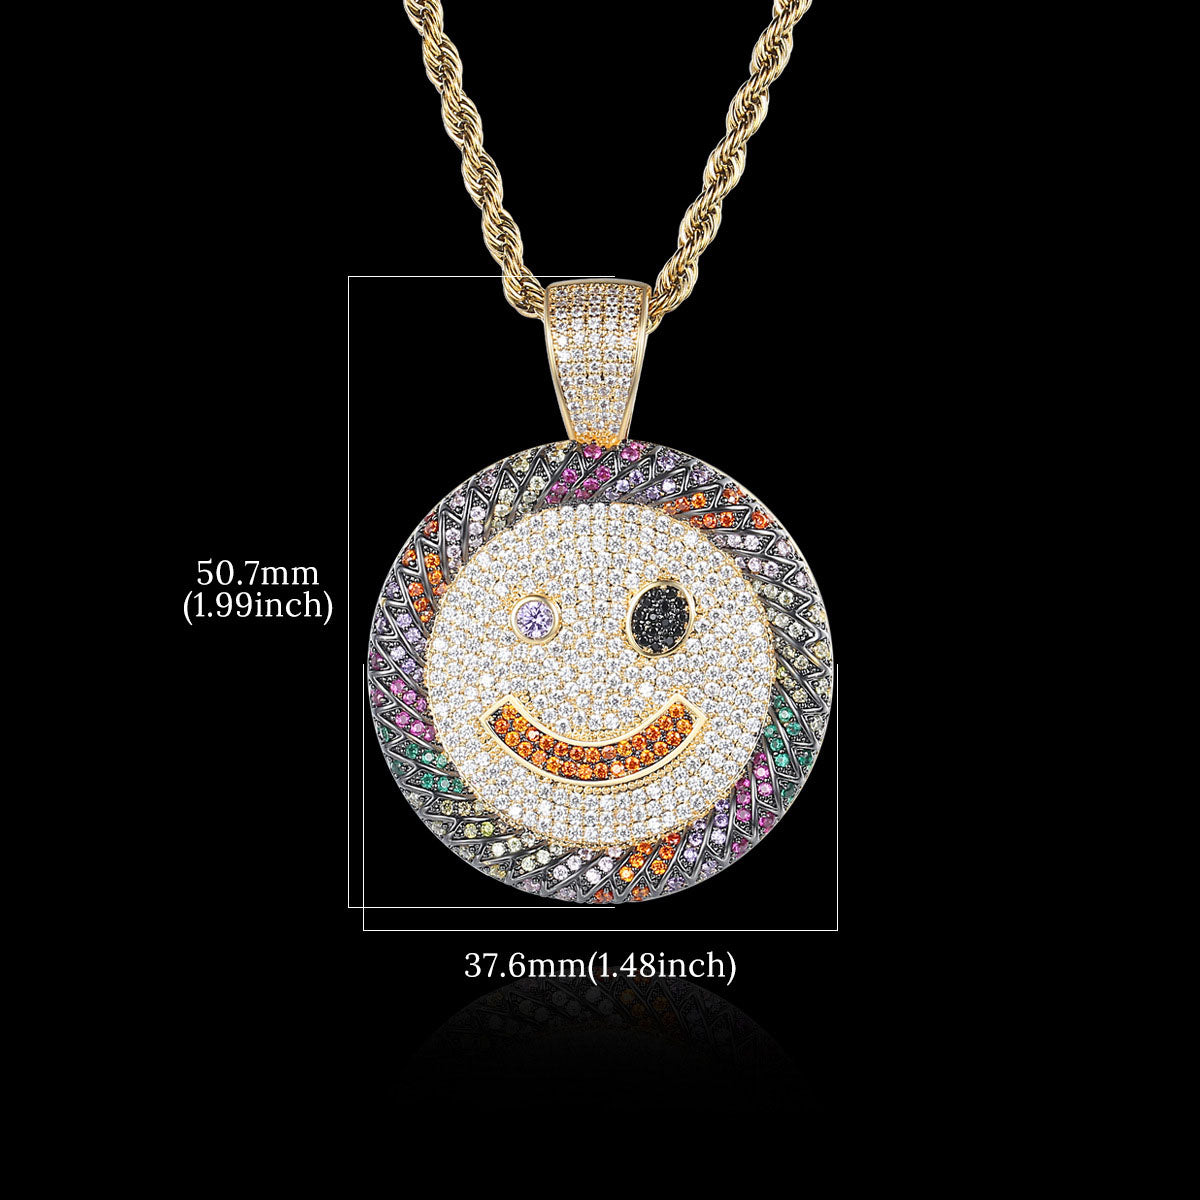 Smiling Face Necklace xccscss.